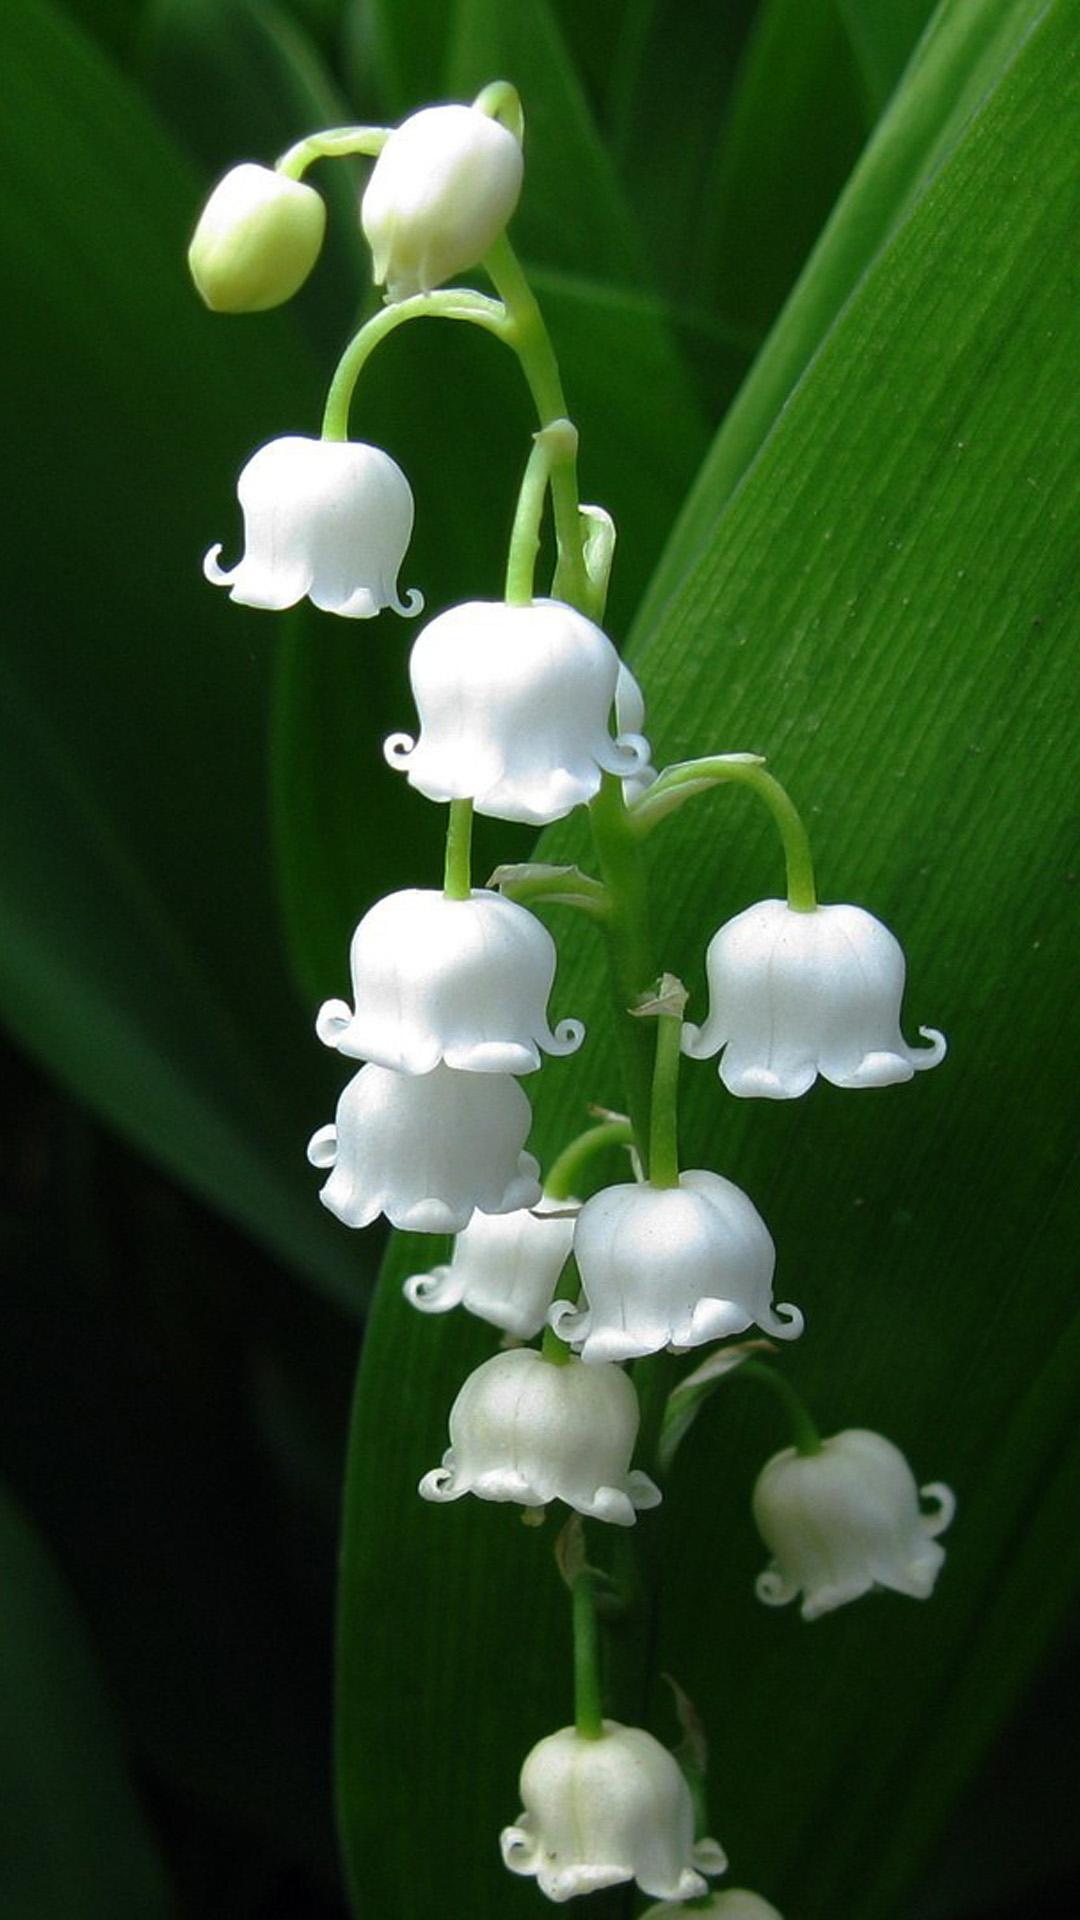 Nature Lily Of Valley iPhone 8 Wallpaper Download. iPhone